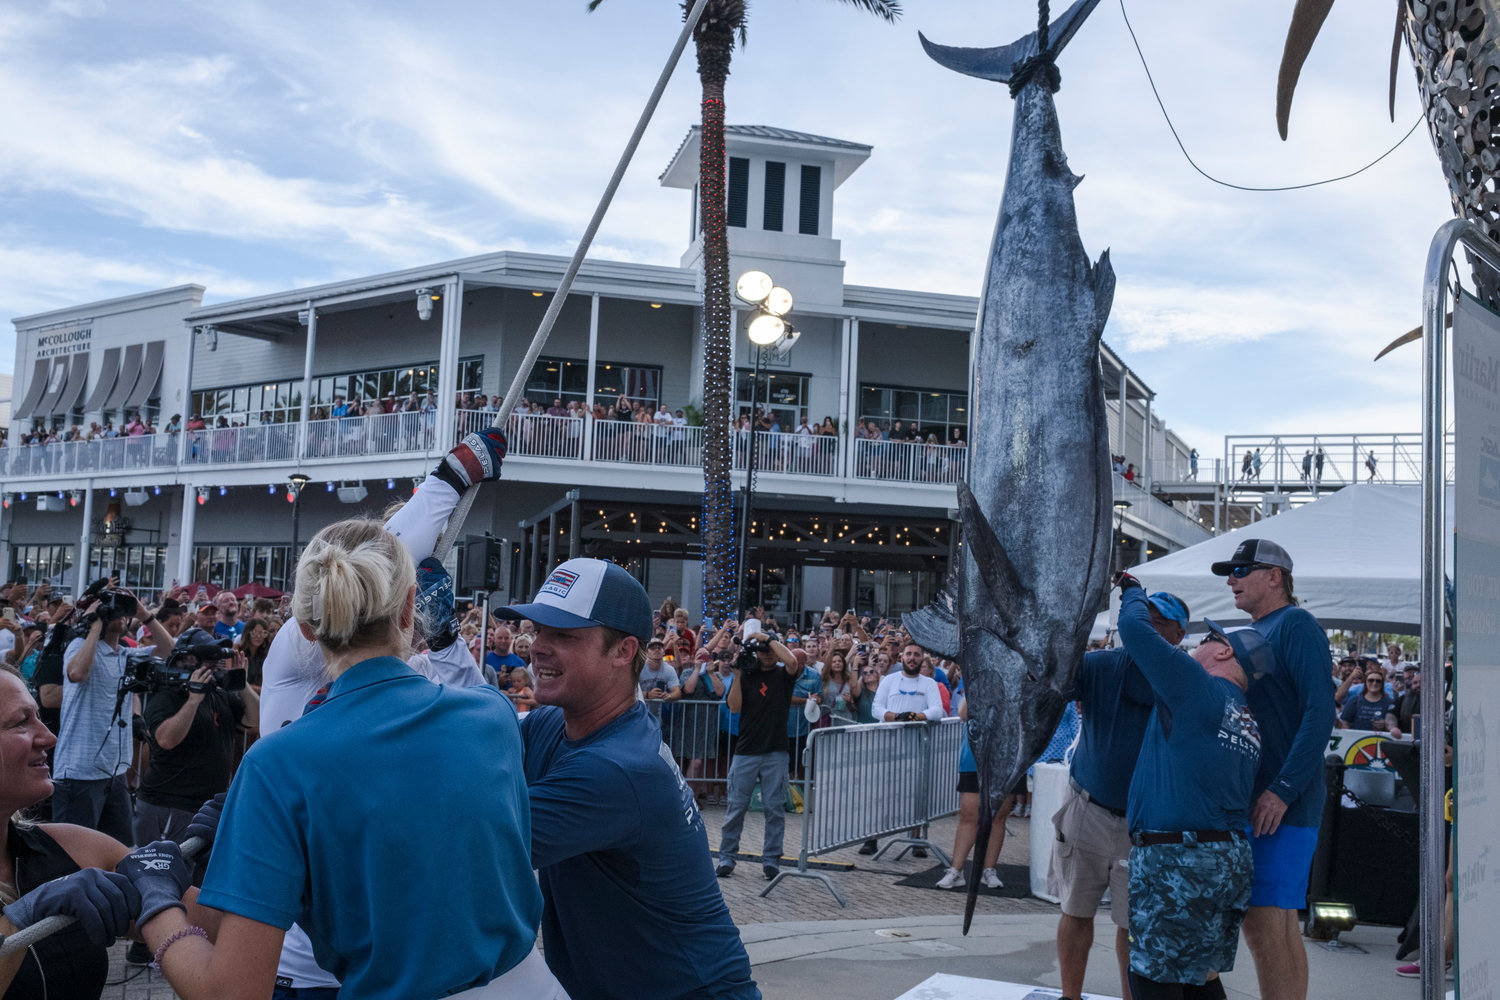 The biggest billfish are hauled out of the Gulf of Mexico and put on display at The Wharf in Orange Beach as part of the “Super Bowl of Sportfishing.” The 11th annual Blue Marlin Grand Championship will be held July 12-16 as one of the highlights of the next year in Baldwin County sports.